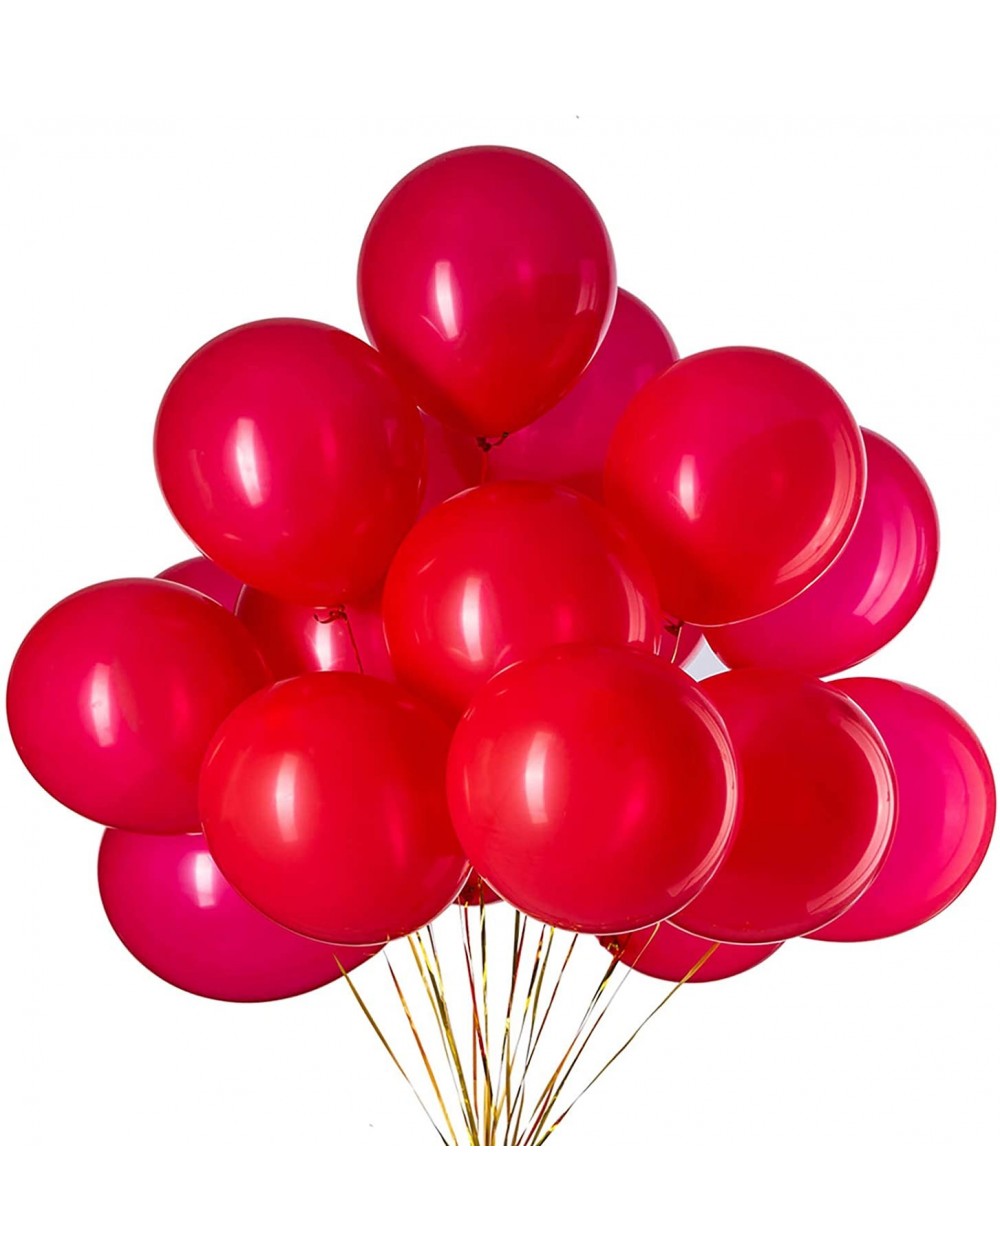 Balloons 12 inch Red Balloons Latex Balloons Helium Balloons Quality Balloons Party Decorations Supplies Pack of 100-3.2g/pcs...